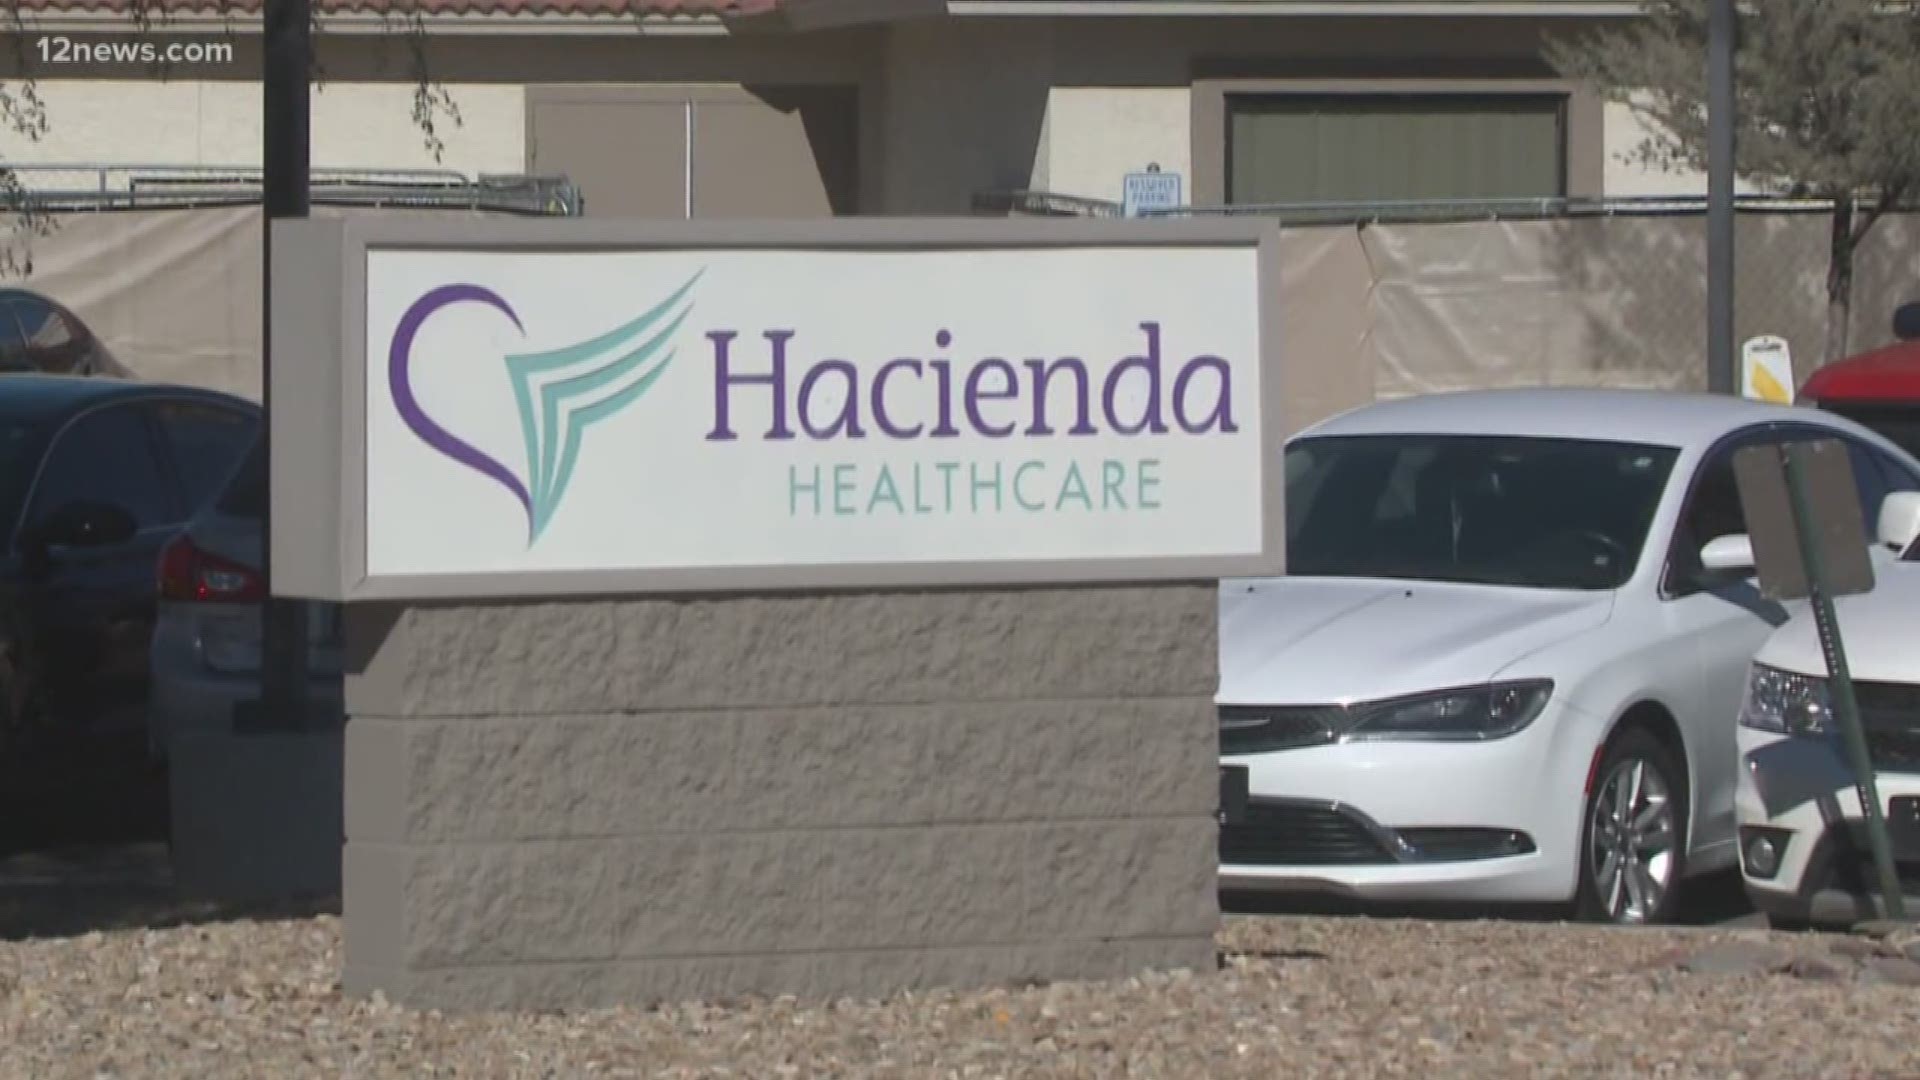 One of the doctors in charge of treating the woman who gave birth to a baby boy at Hacienda Healthcare last month has been identified. His name is Dr. Thanh Nguyen and he has been suspended. Another doctor for the woman has resigned.